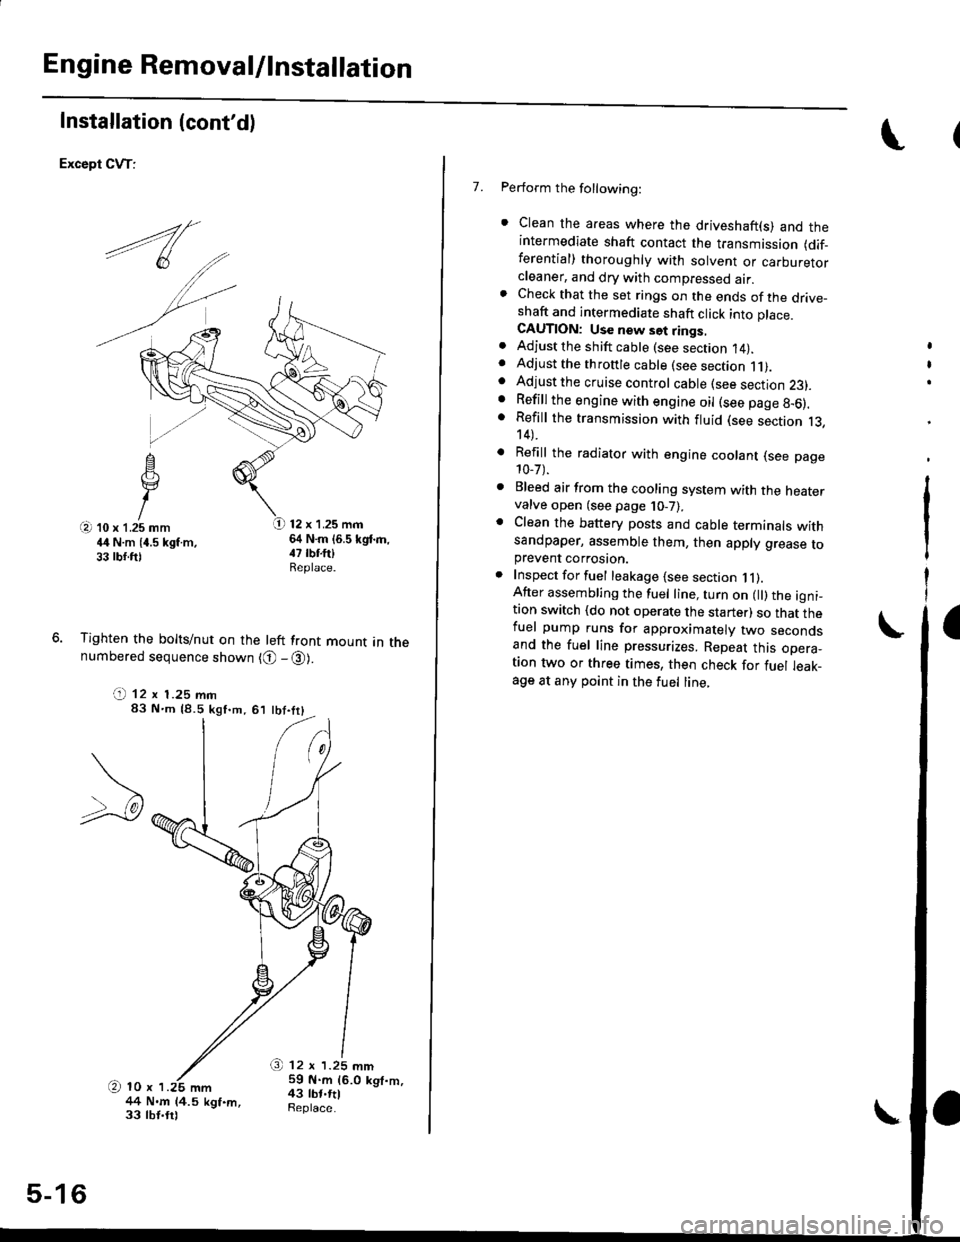 HONDA CIVIC 1999 6.G Workshop Manual Engine Removal/lnstallation
Installation (contd)
Except CVT:
12 x 1.25 mm64 N.m (6.5 kgd.m,
Tighten the bolts/nut on the left front mount in thenumbered sequence shown {O - @).
(t 12 x 1.25 mm83 Nm 